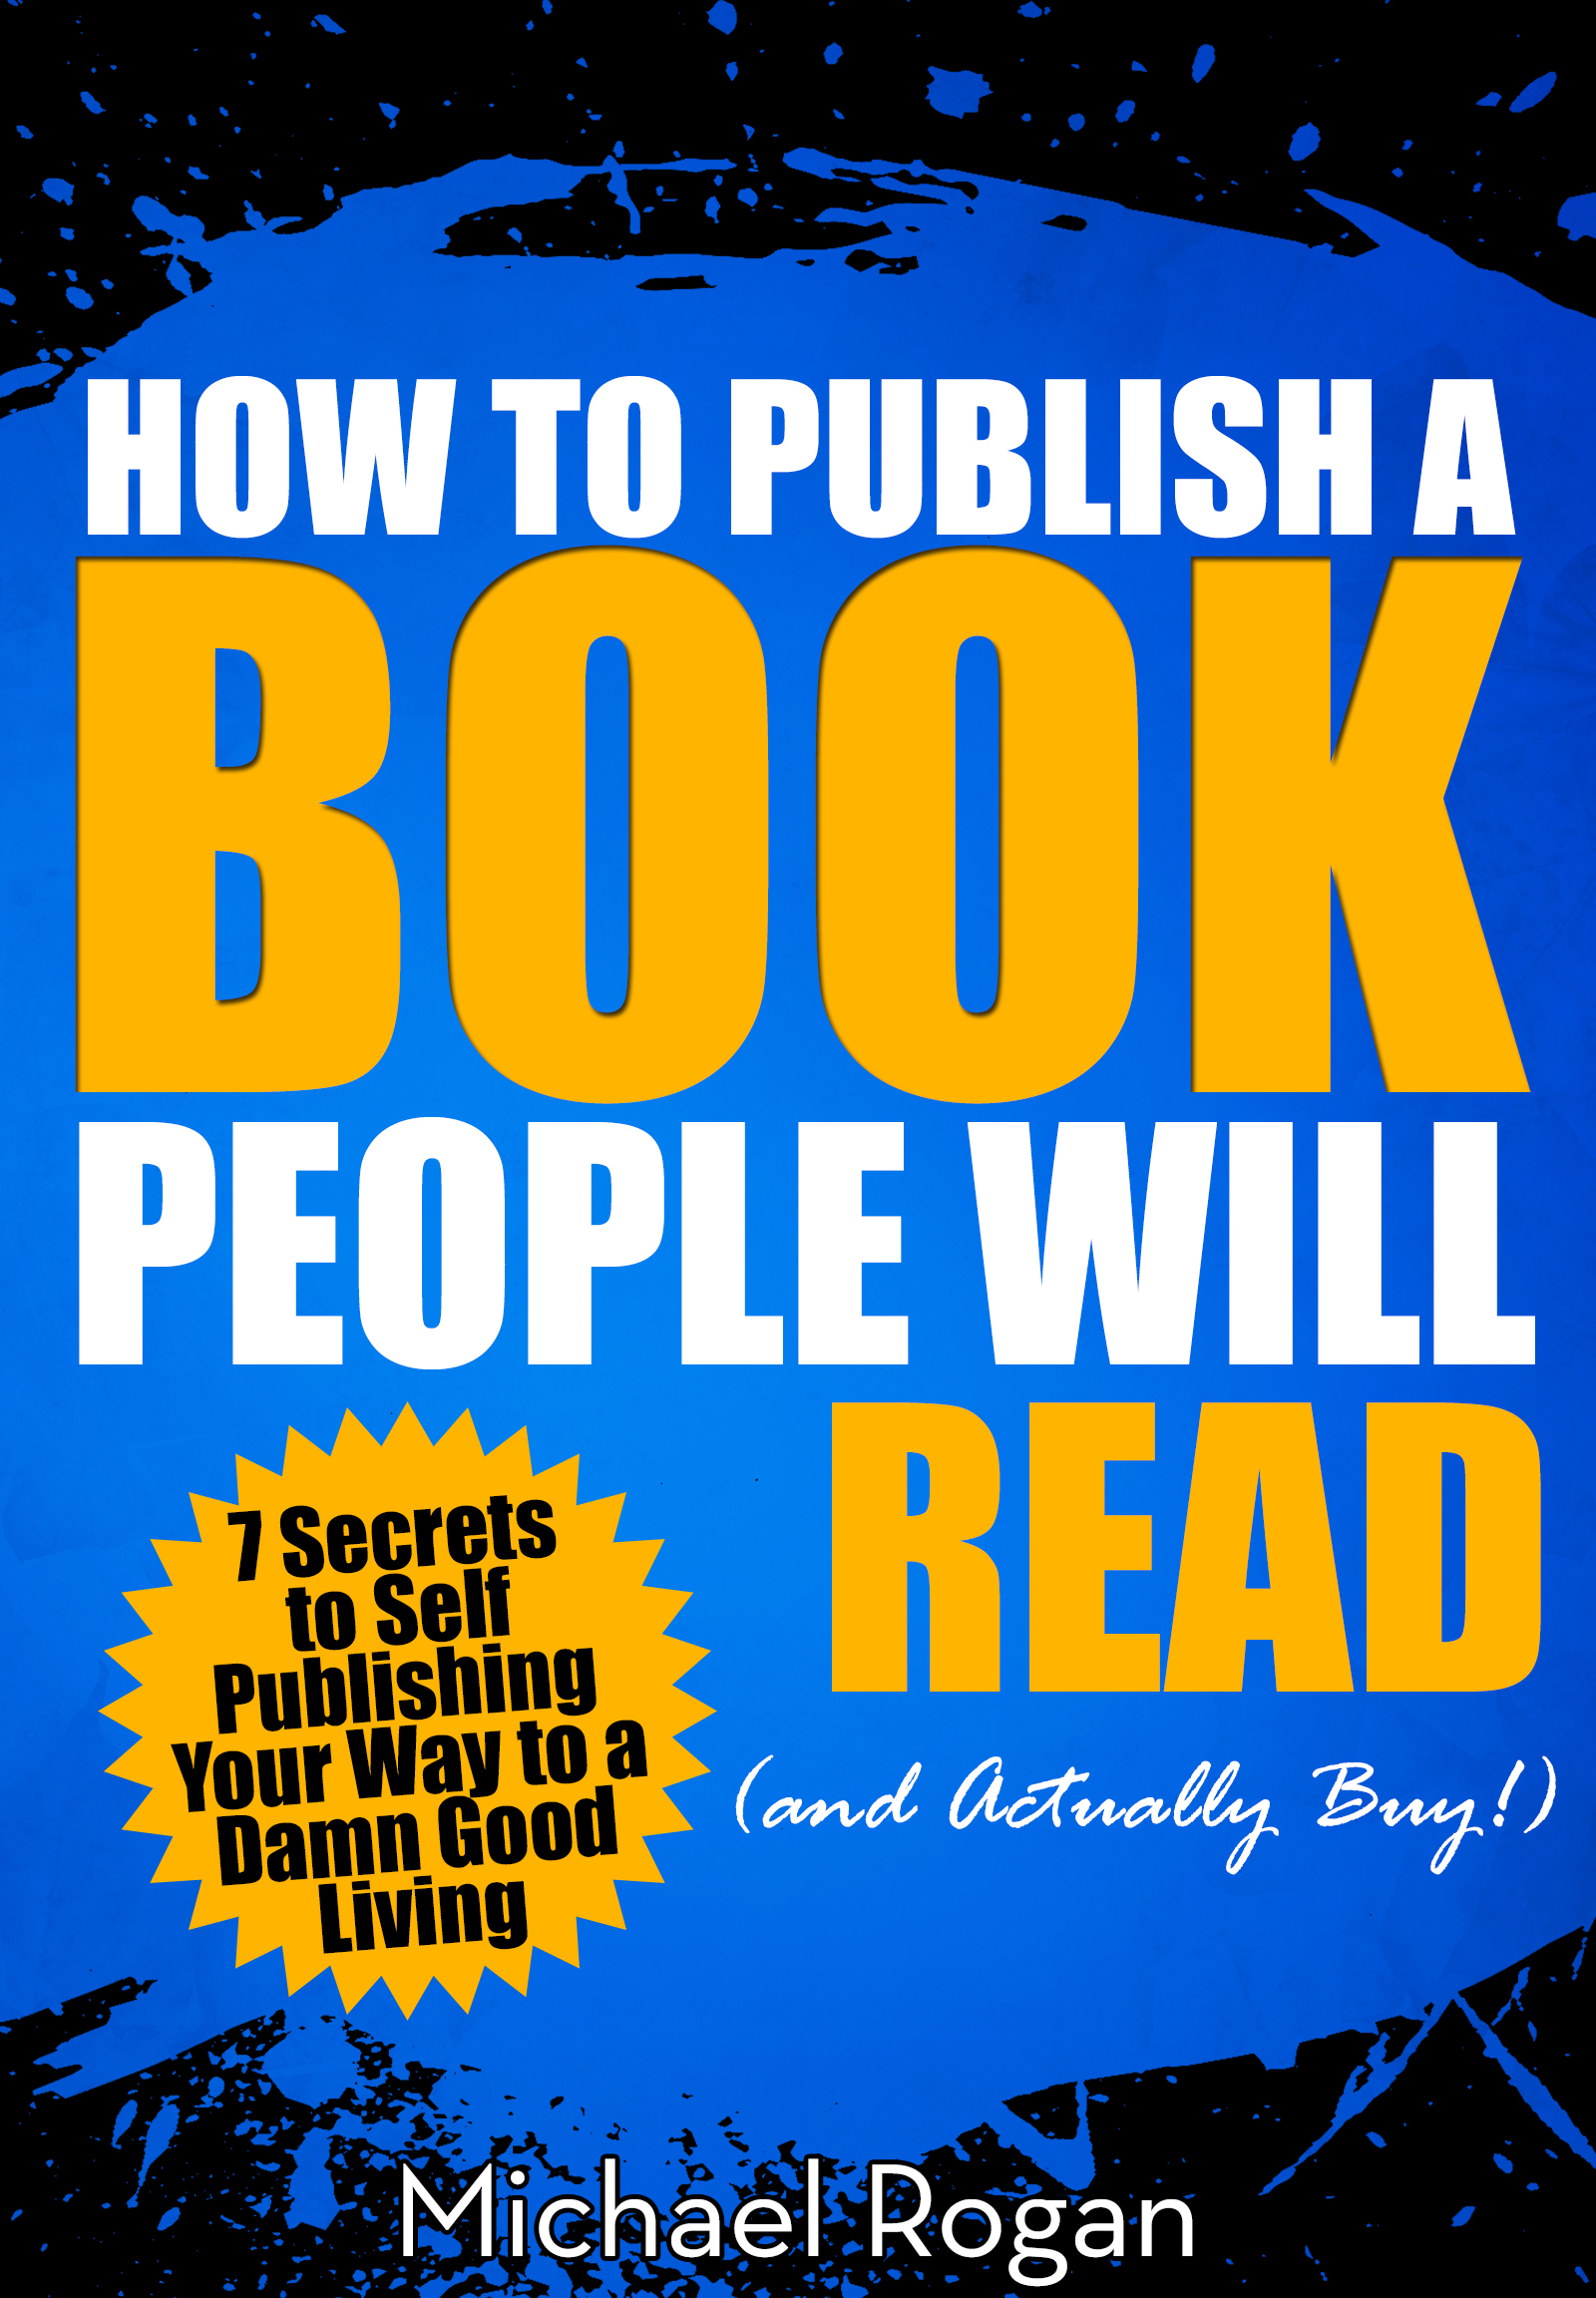 How to Publish a Book That Doesn't Suck